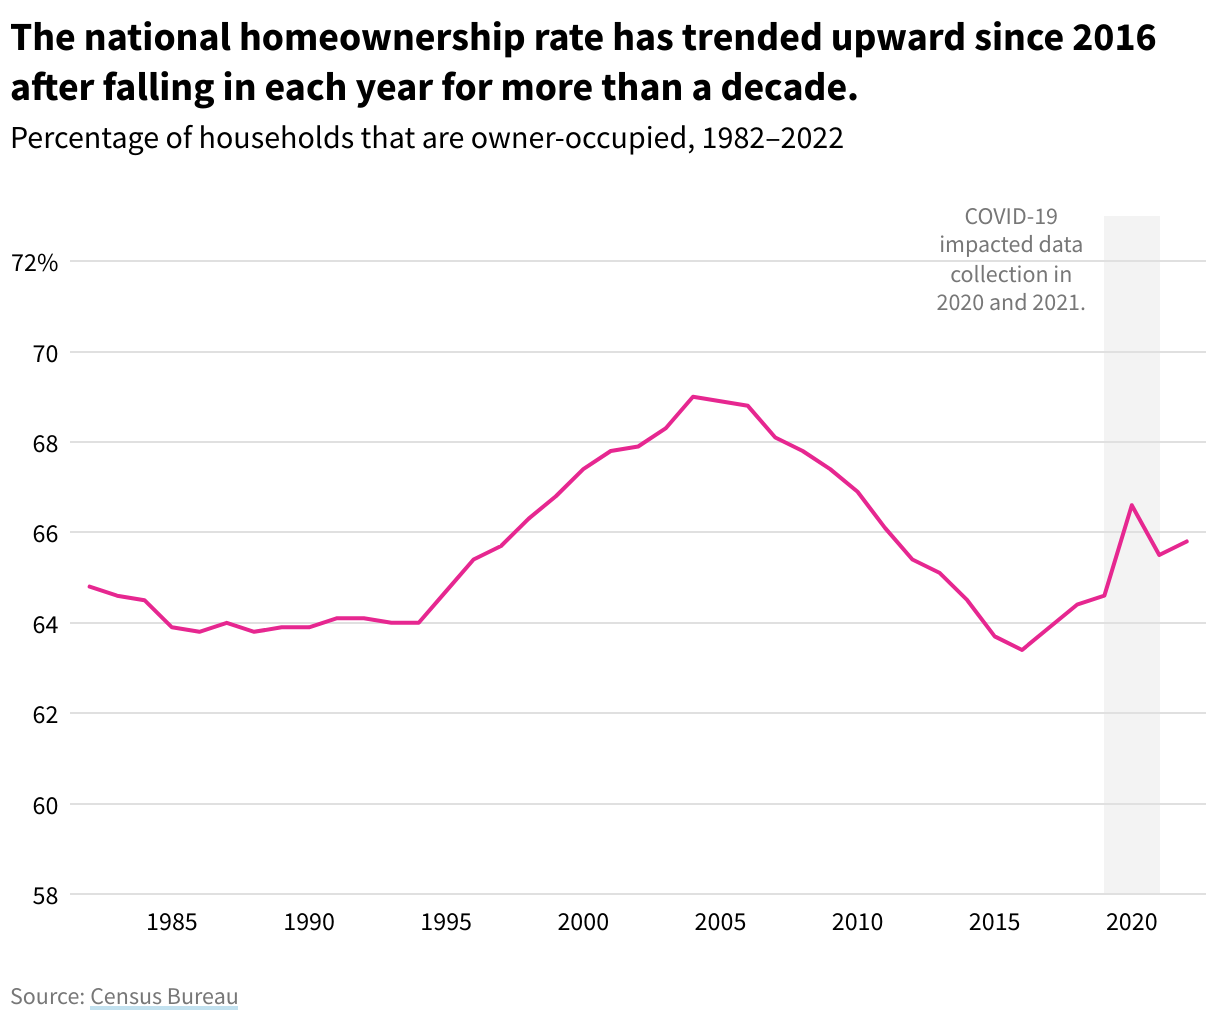 A line chart showing the national homeownership rate from 1982 to 2022. The chart shows an increase from 1994 to 2004, a decrease from 2004 to 2016, and then a general increase from 2016 to 2022.